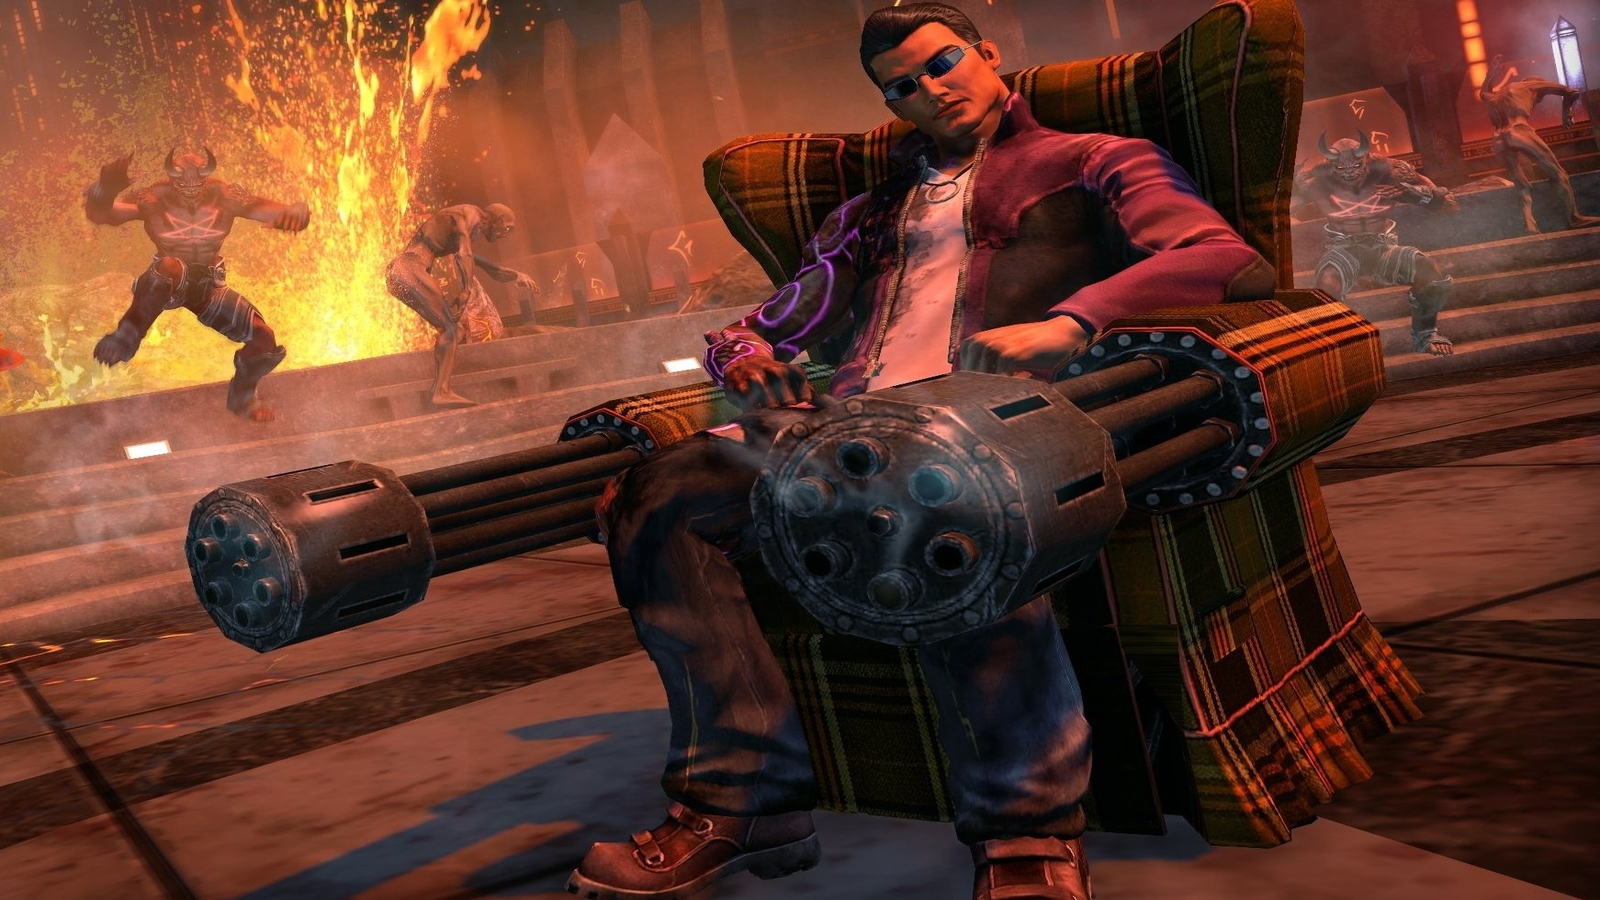 Saints Row: Gat out of Hell Cheats & Trainers for PC